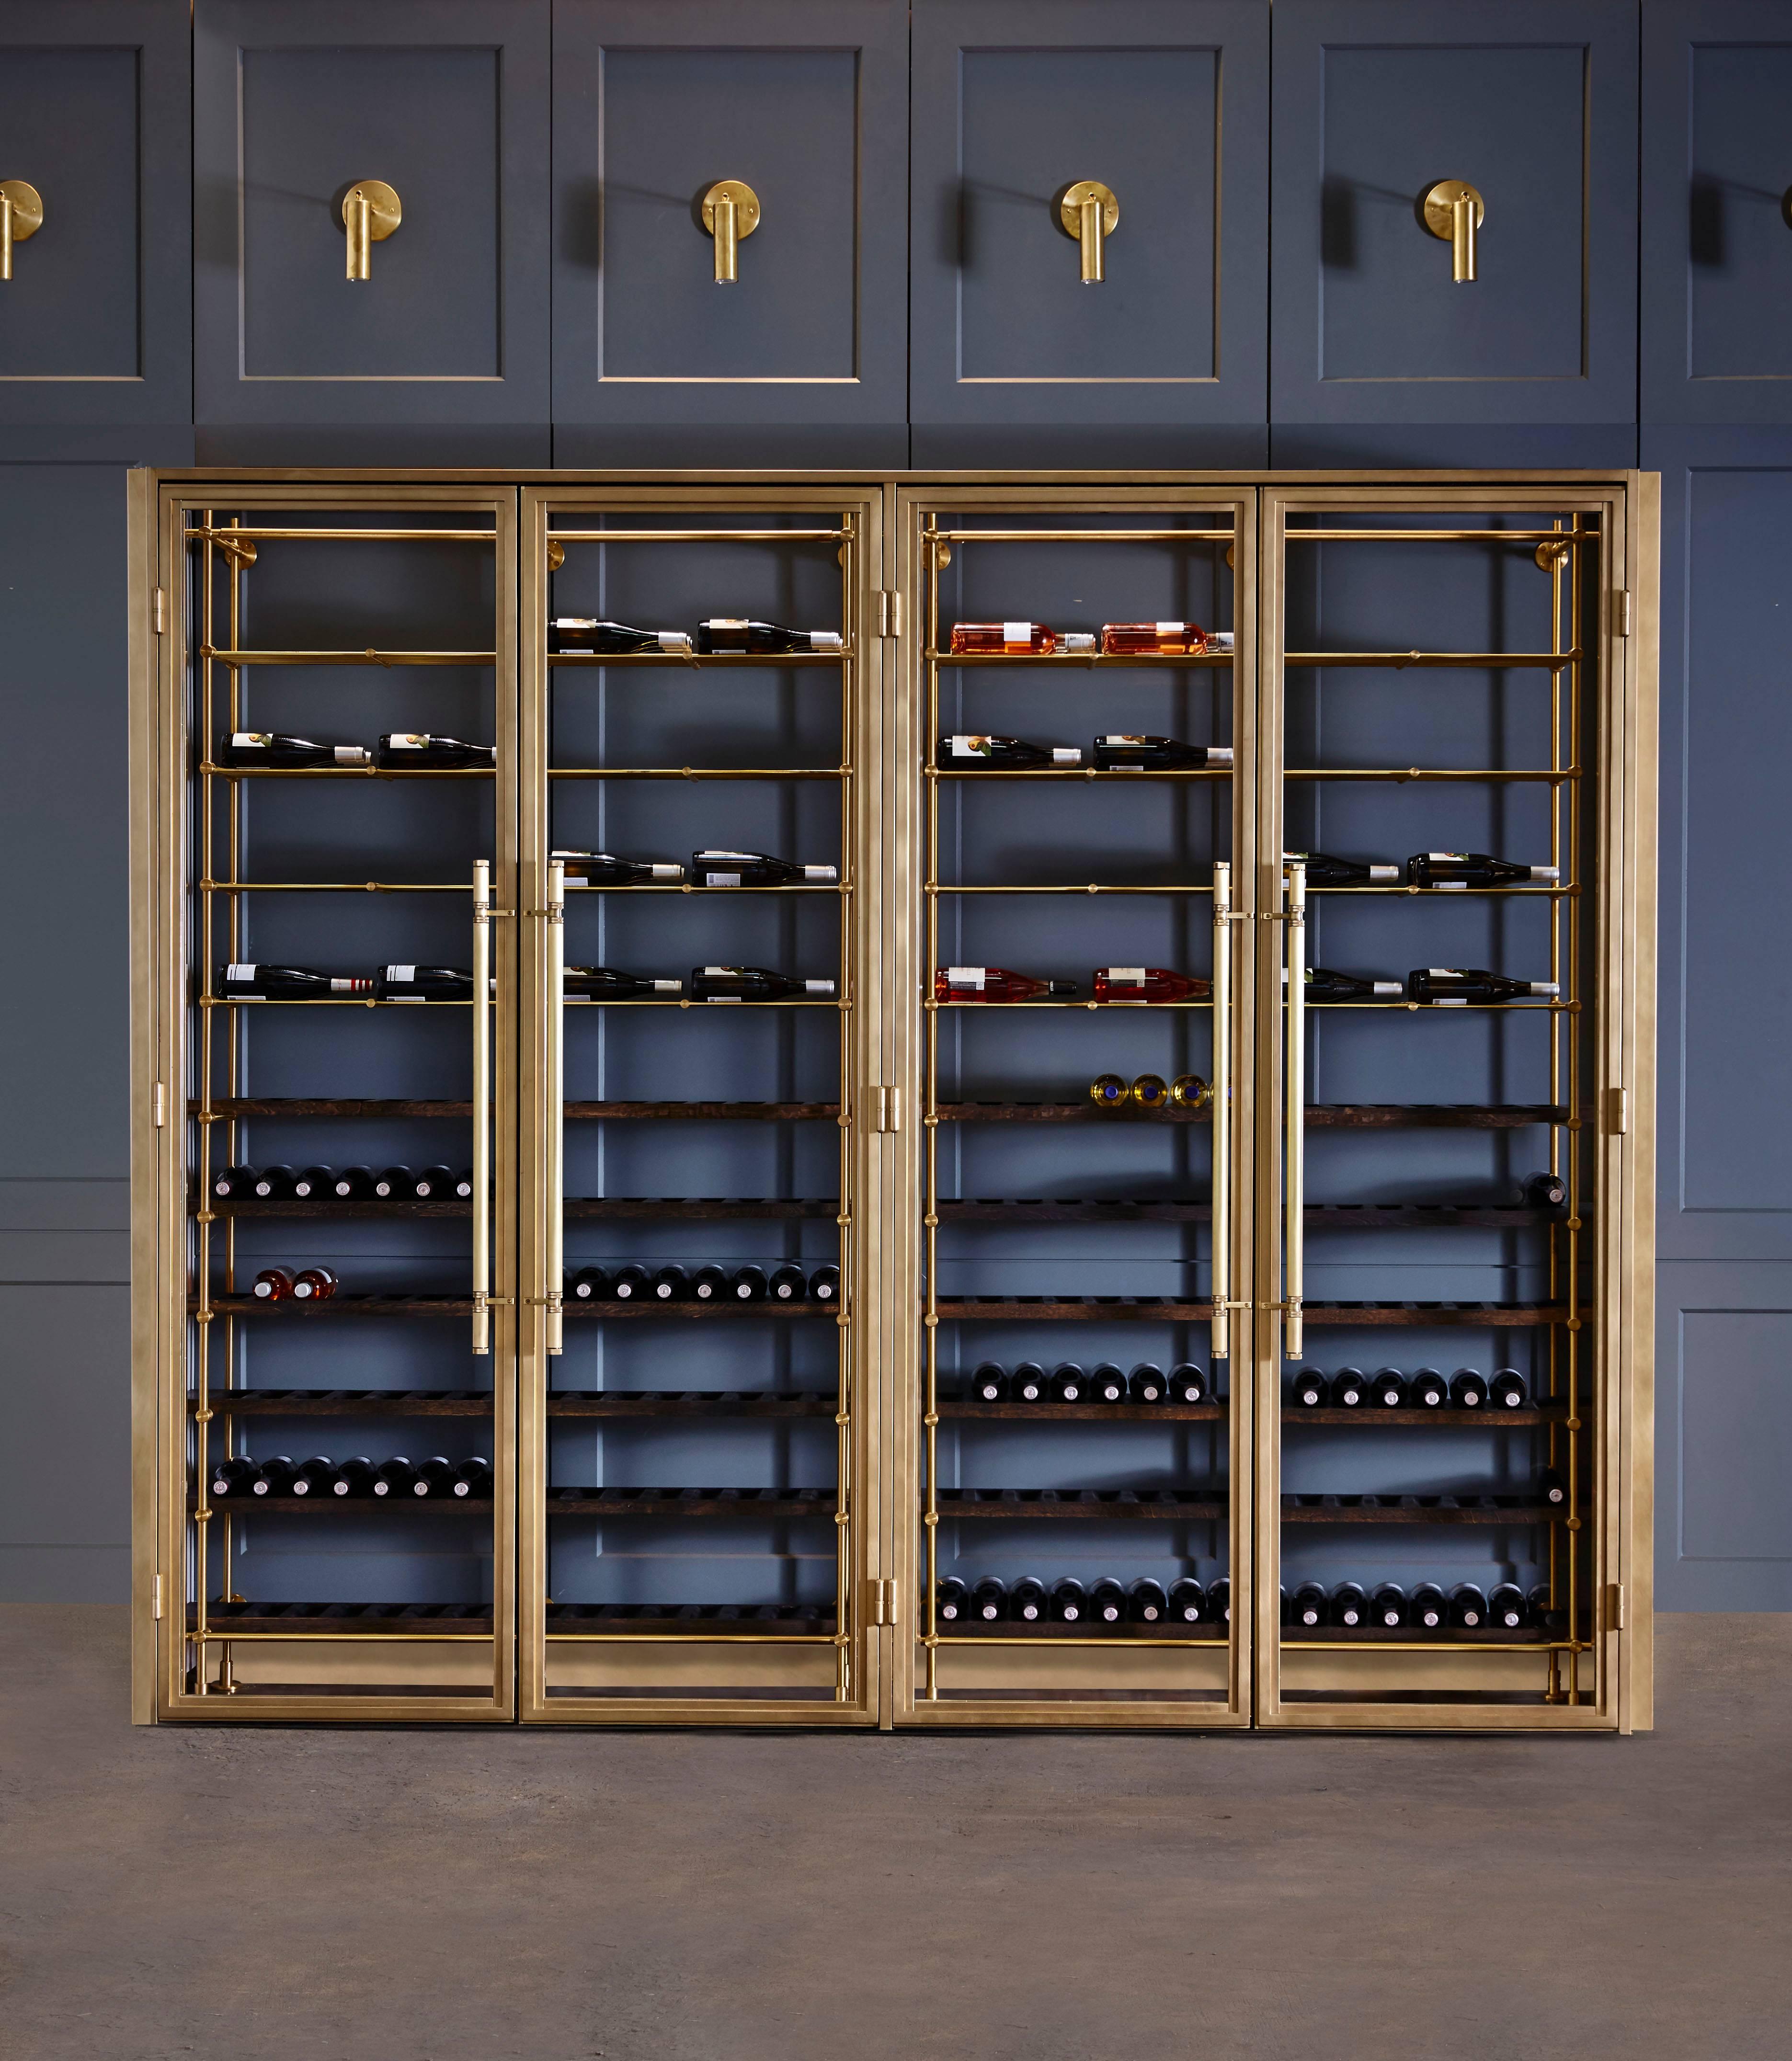 Amuneal’s brass wine room is constructed using the clean mechanical details from our Frankford Panel System. The metalwork is all fabricated from solid brass with a light patinated finish. Each frame is designed to be removable and to capture